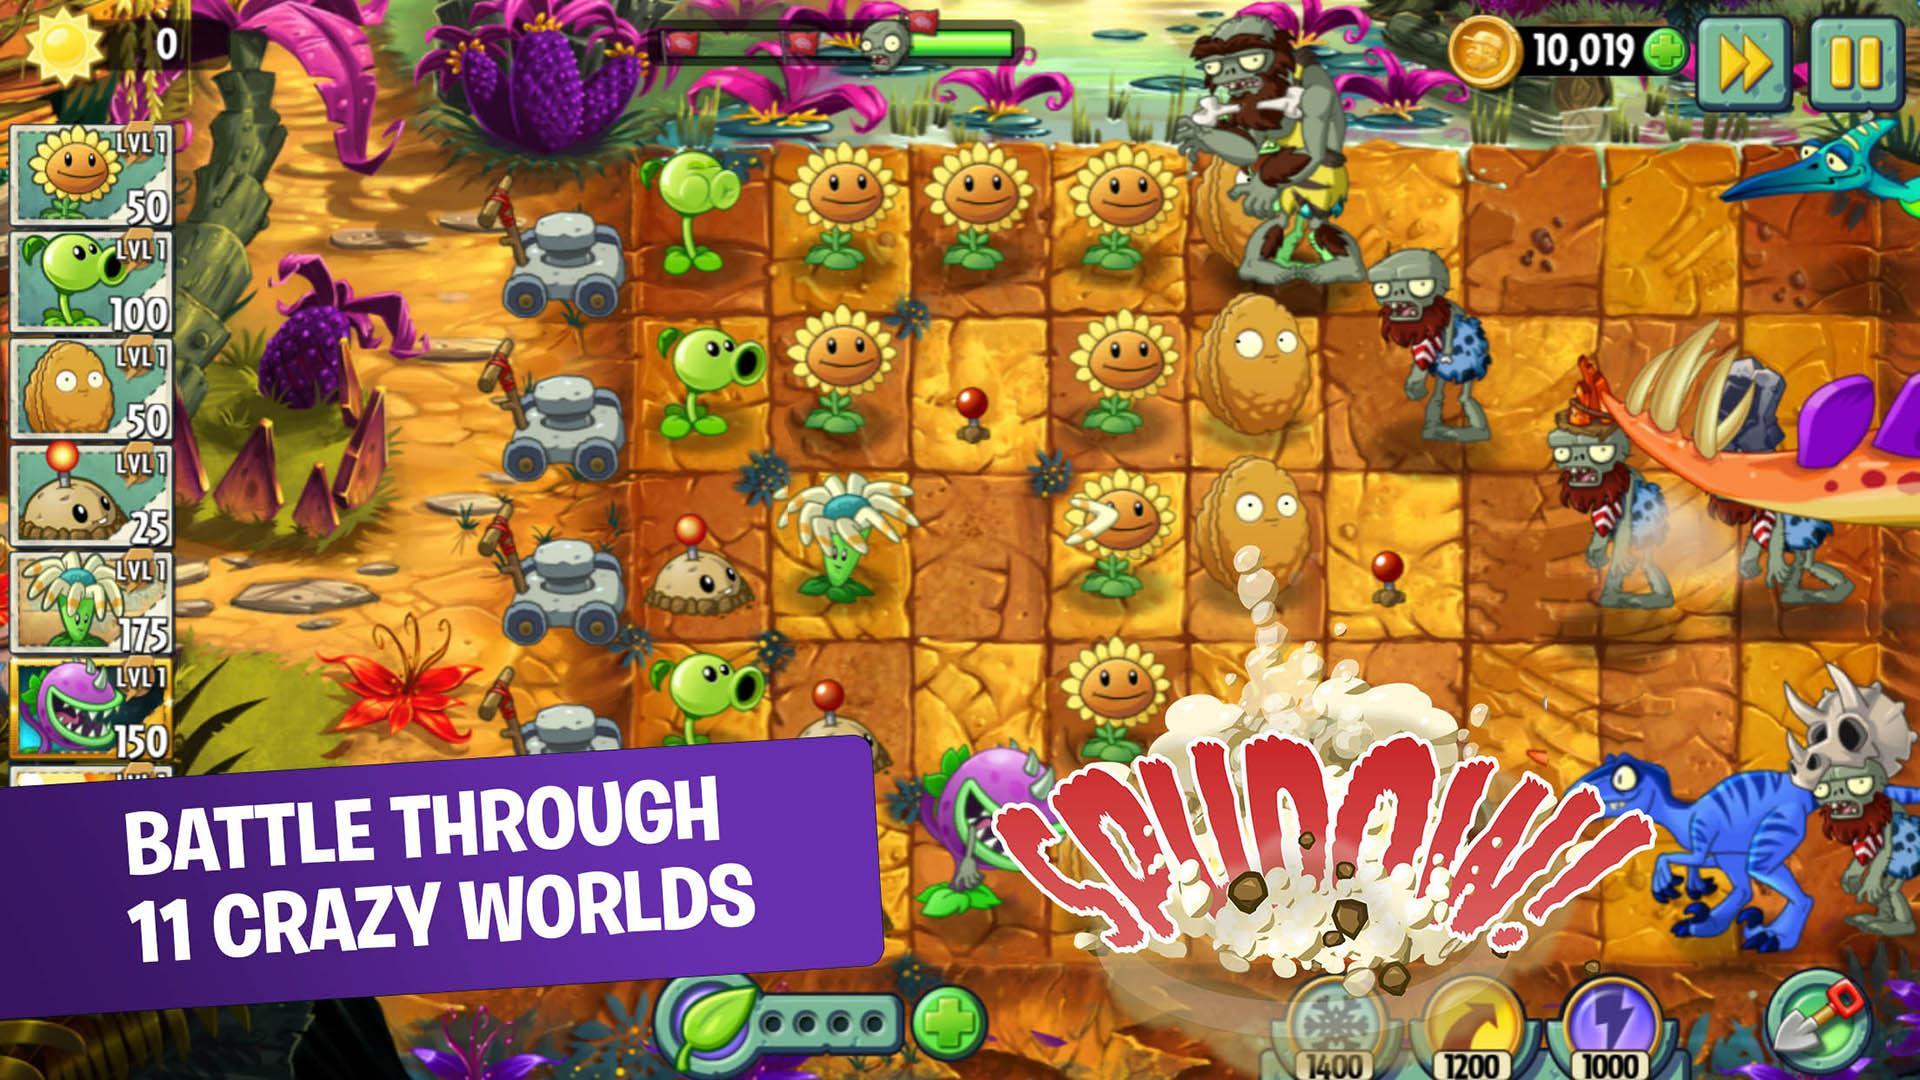 Plants Vs. Zombies 2 Apk Download - Free “Tower Defense” Game For Android | Apkpure.com